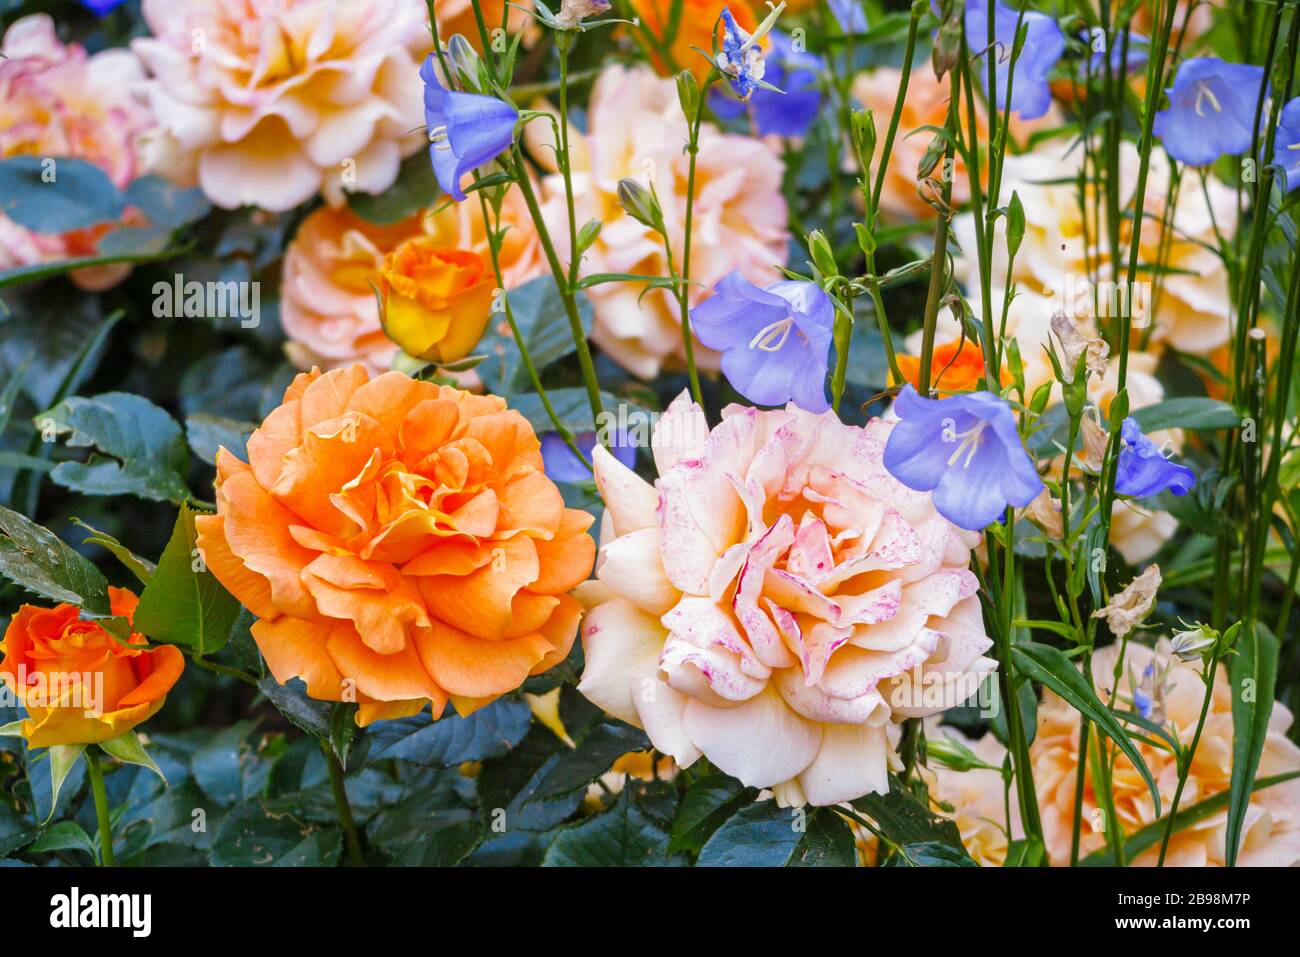 Pretty apricot orange fragrant fully double floribunda rose 'Bowled Over' fading to pink flowering with pale blue campanula in an English garden Stock Photo